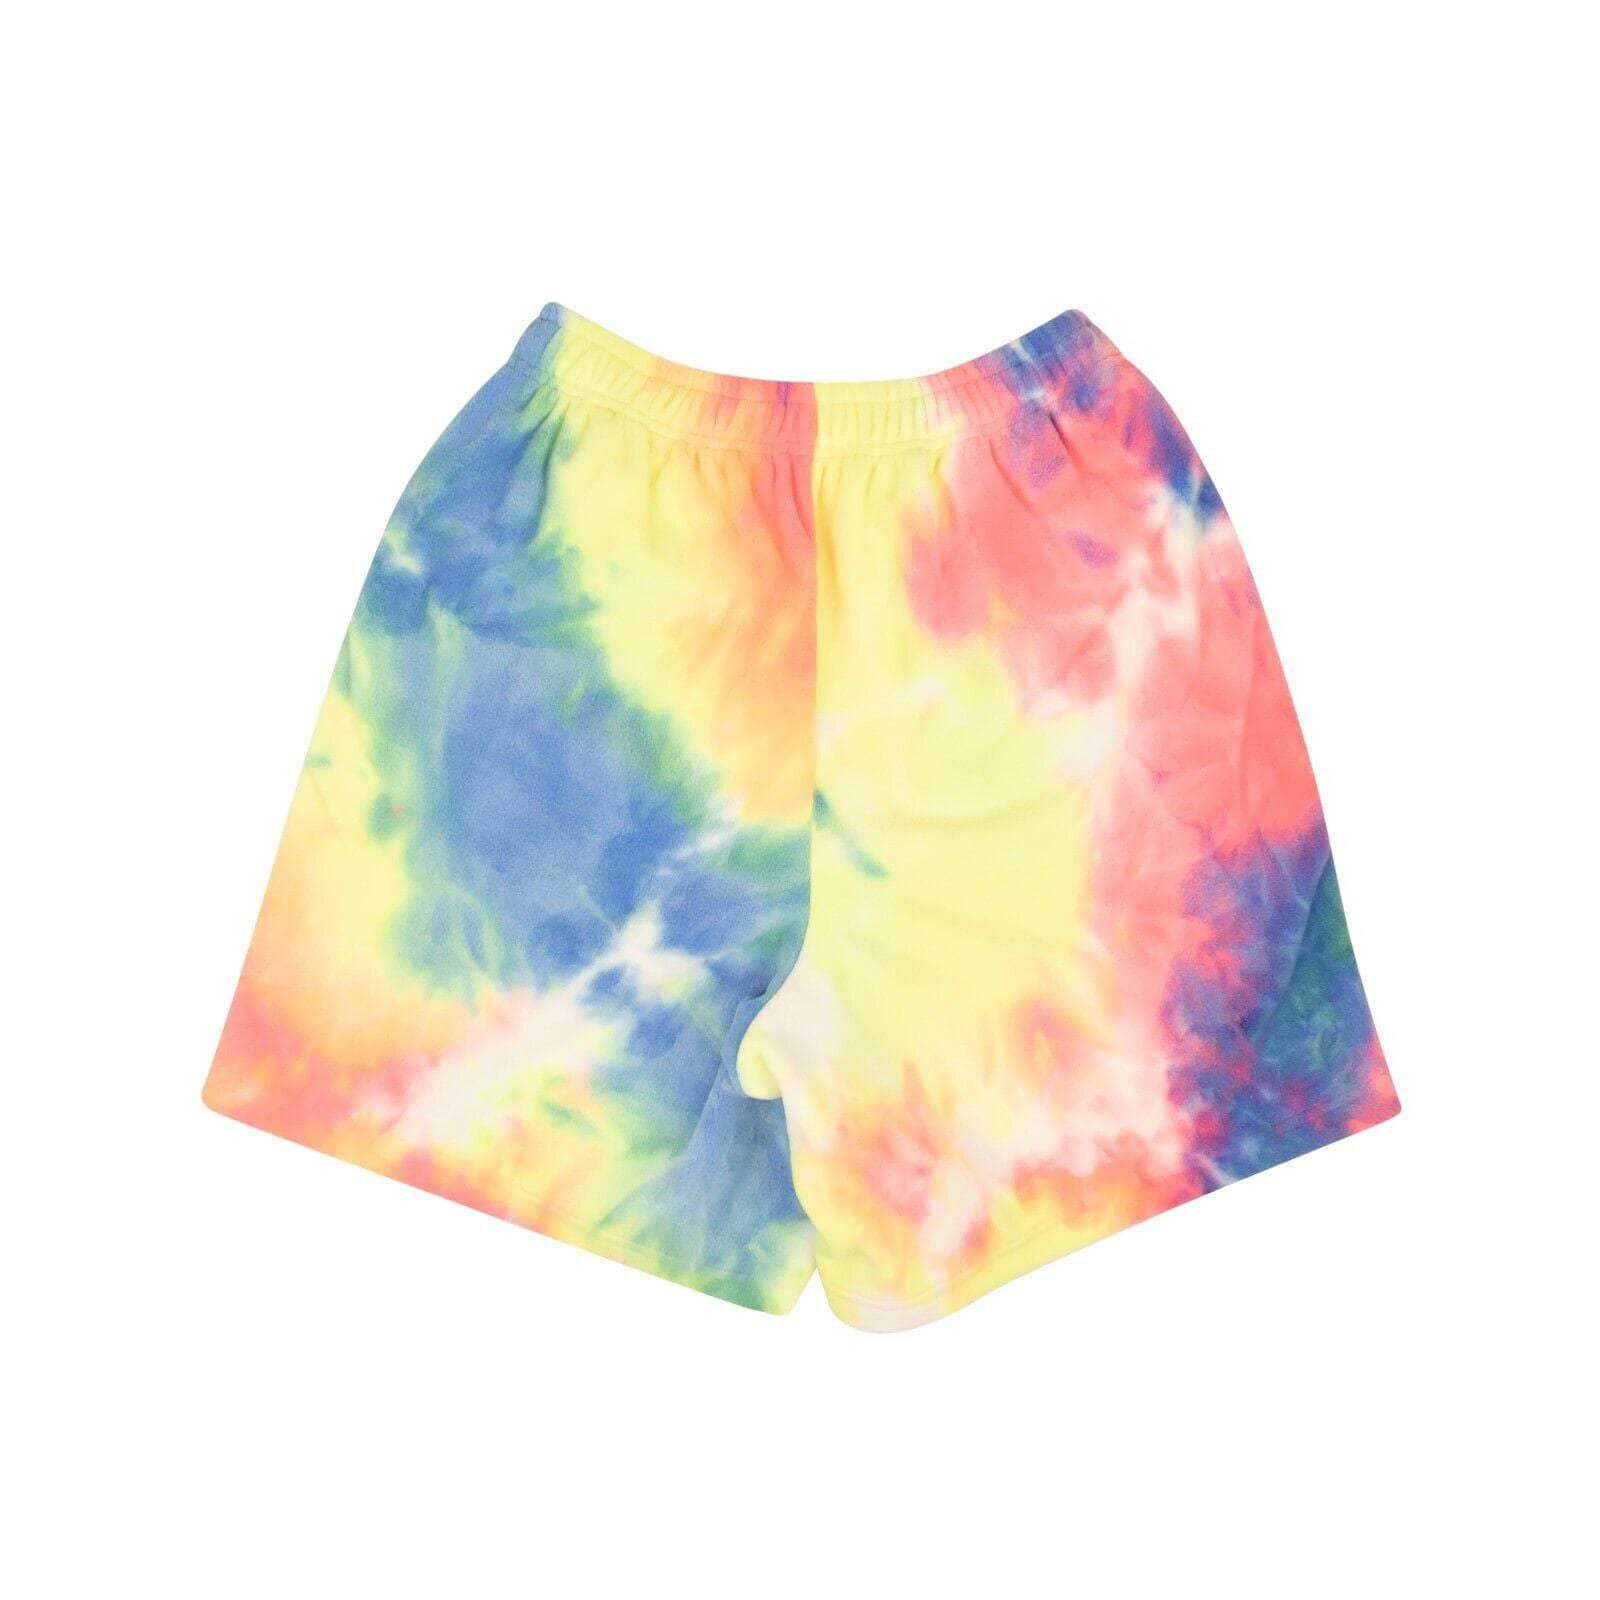 Bossi bossi, channelenable-all, chicmi, couponcollection, gender-mens, main-clothing, mens-shoes, size-l, size-m, size-s, size-xl, size-xxl, under-250 Multicolor Tie Dye Polyester Fleece Shorts